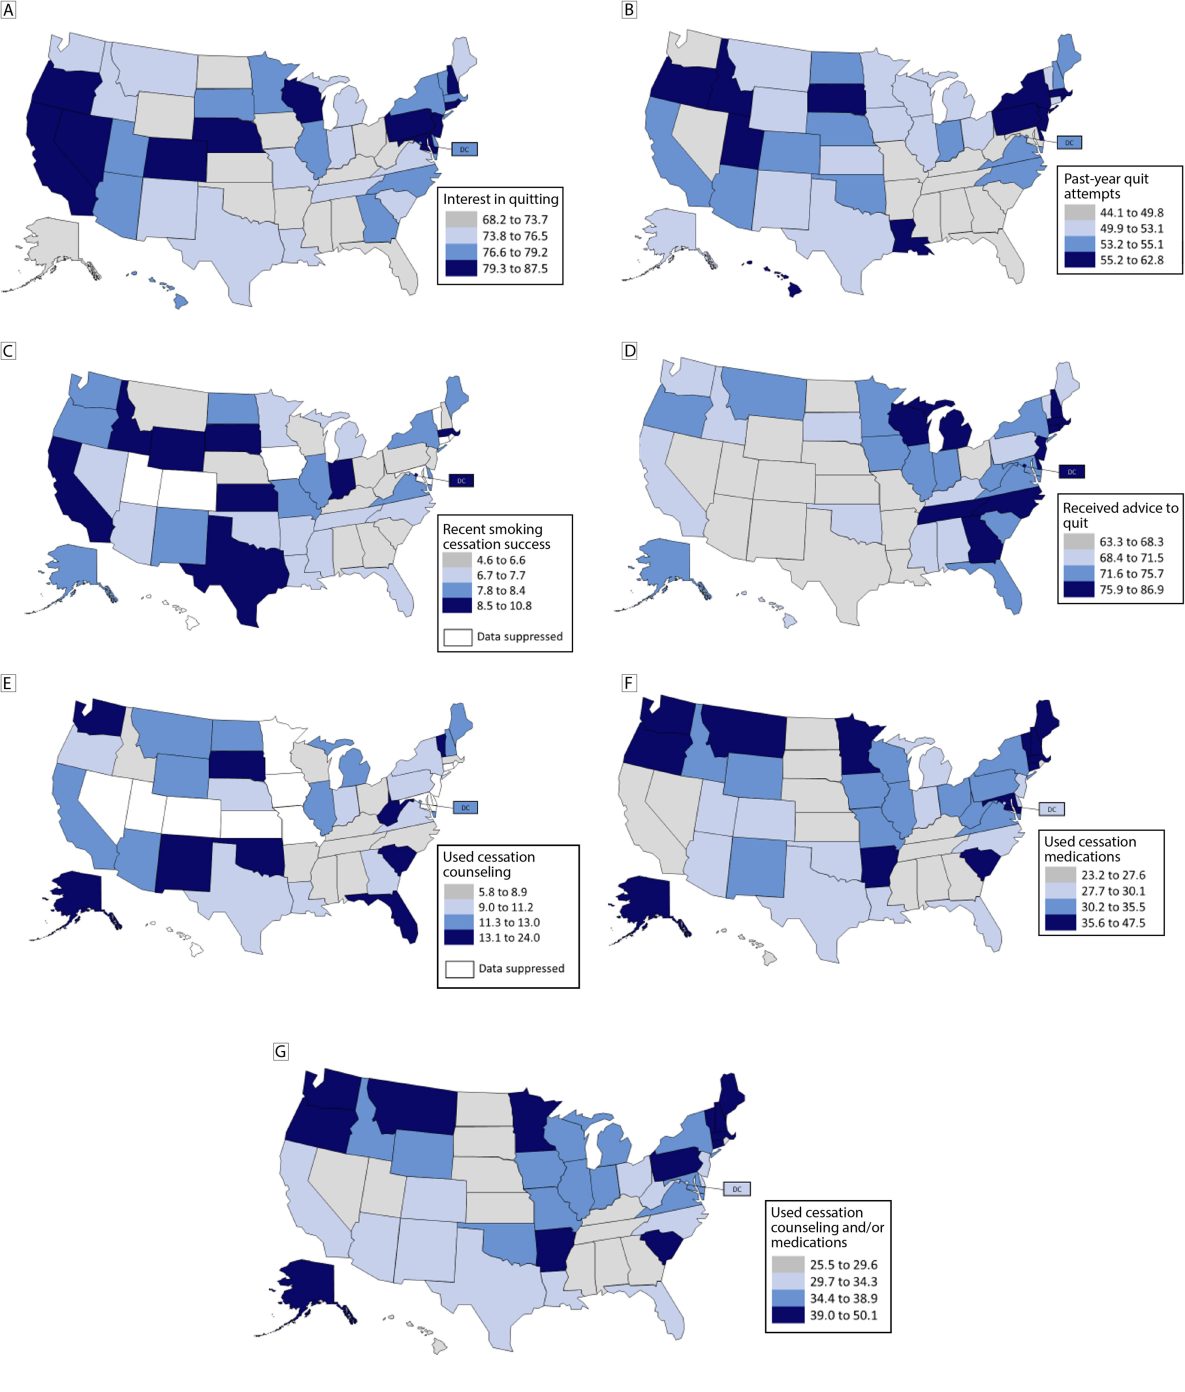 State-level prevalence of smoking cessation and cessation treatment indicators among adults aged ≥18 years who reported currently or formerly smoking cigarettes, by quartile, Tobacco Use Supplement to the Current Population Survey, United States, 2018–2019. All categories are defined in the Methods section.